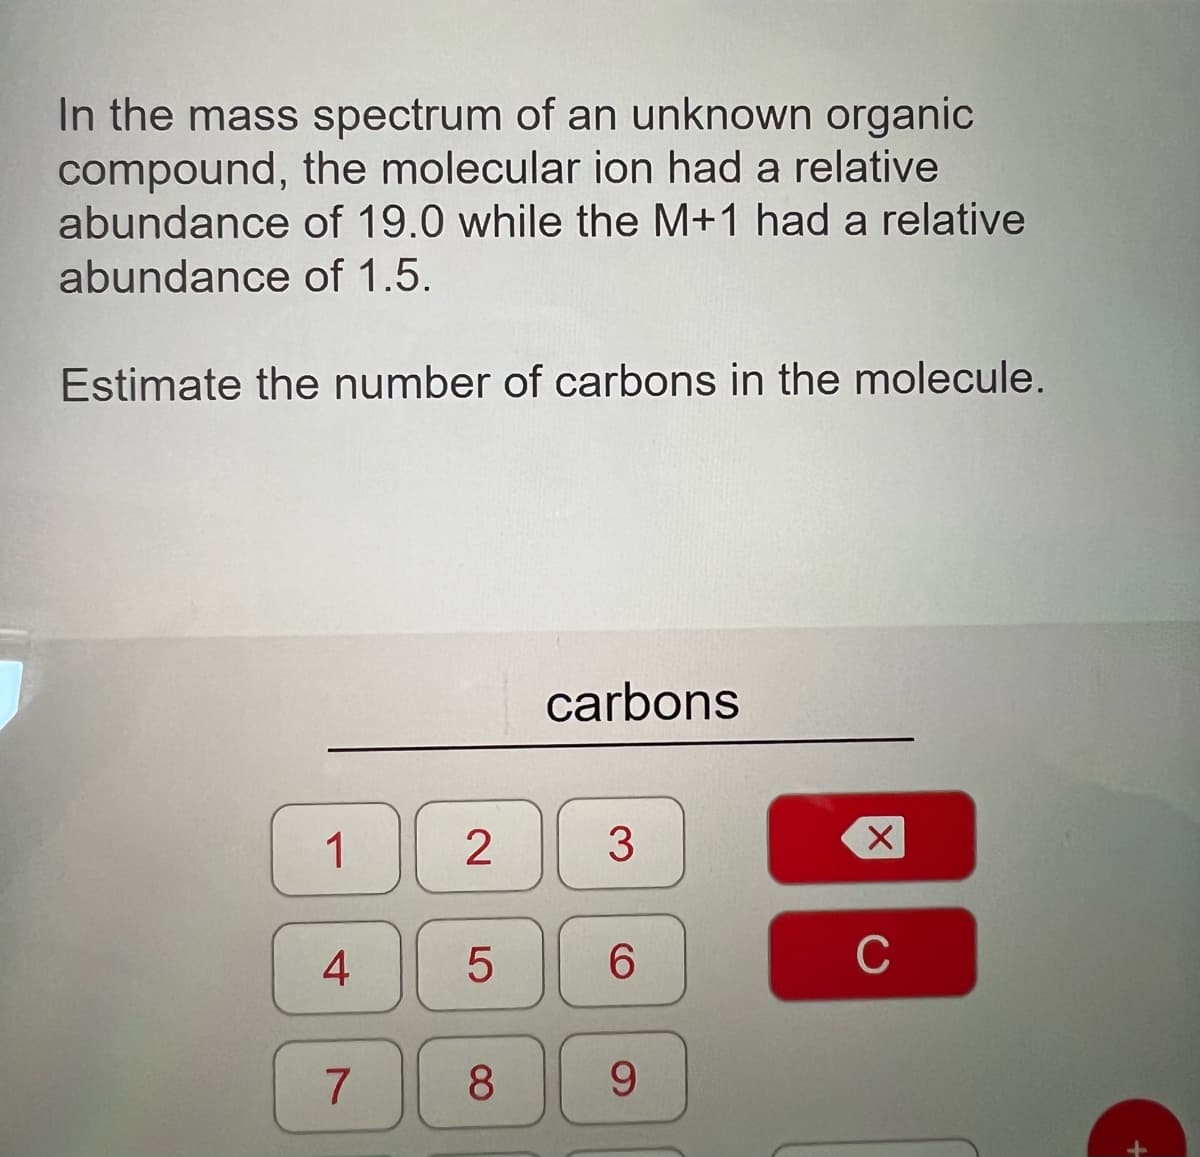 In the mass spectrum of an unknown organic
compound, the molecular ion had a relative
abundance of 19.0 while the M+1 had a relative
abundance of 1.5.
Estimate the number of carbons in the molecule.
1
4
7
2
LO
5
8
carbons
3
6
9
X
C